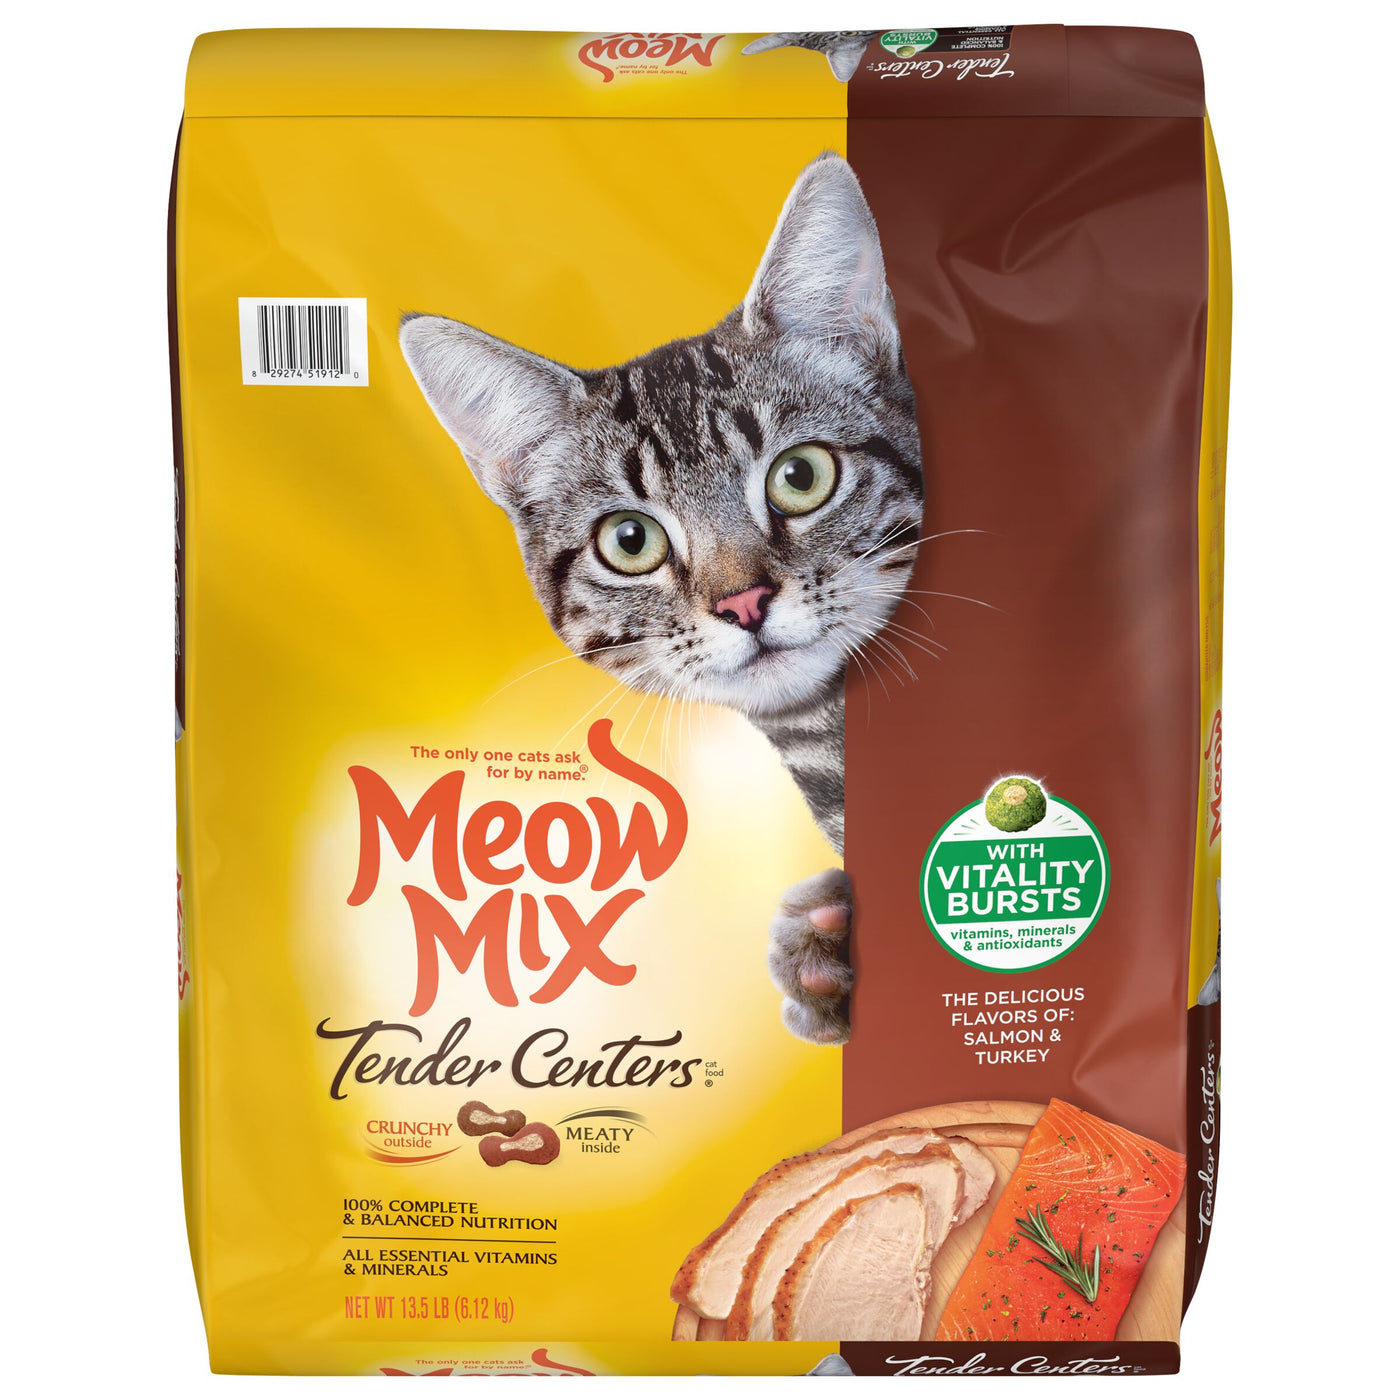 Meow Mix Tender Centers Salmon and Turkey Dry Cat Food, 13.5 lb